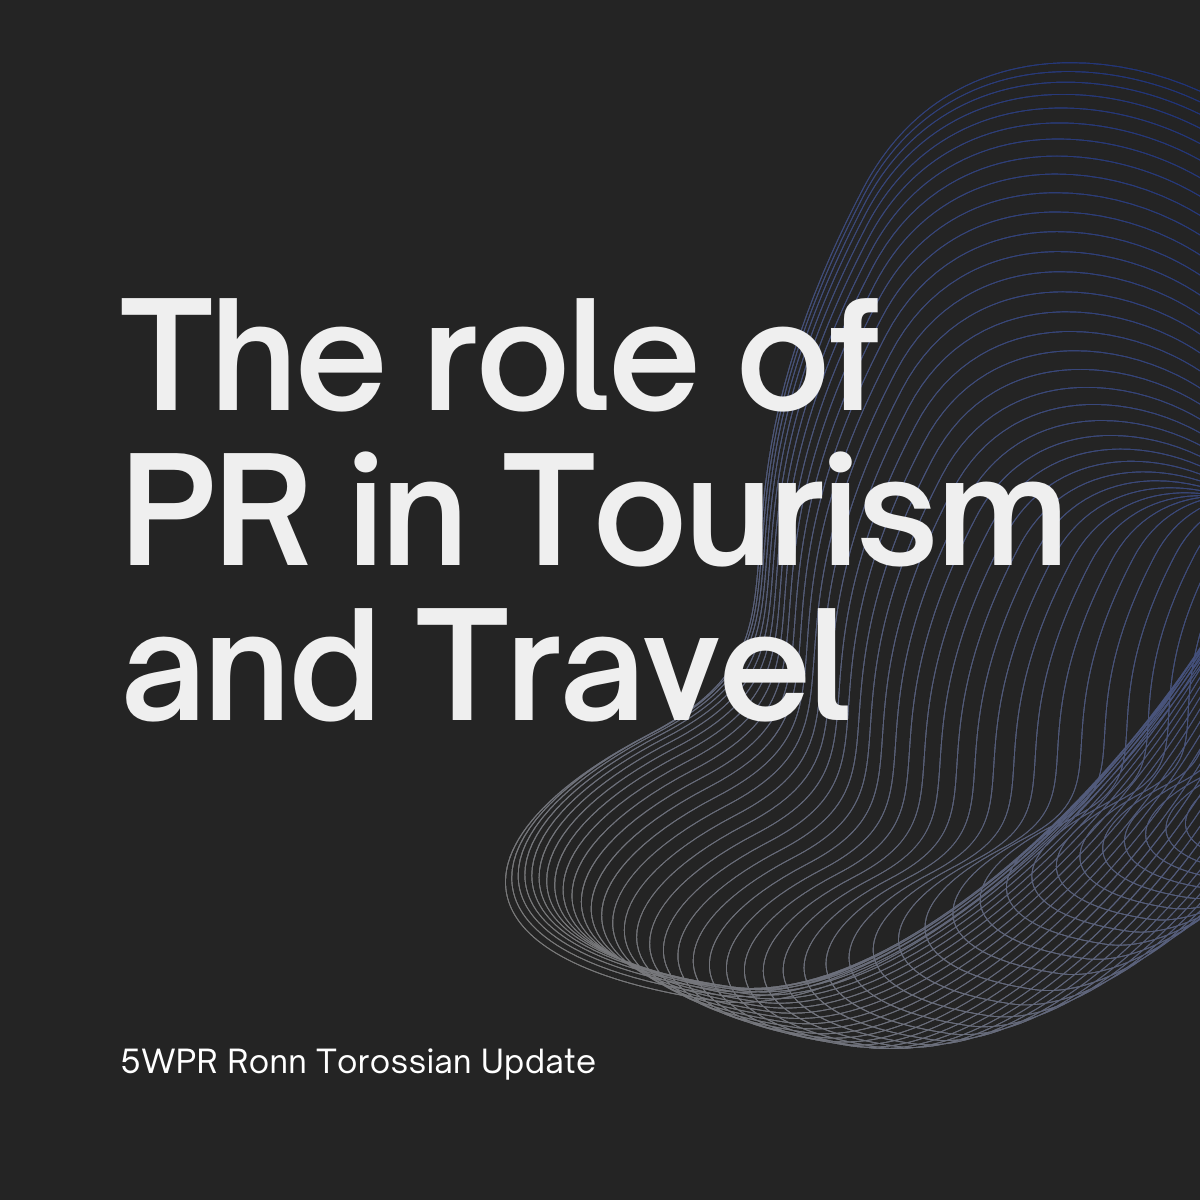 The role of PR in Tourism and Travel